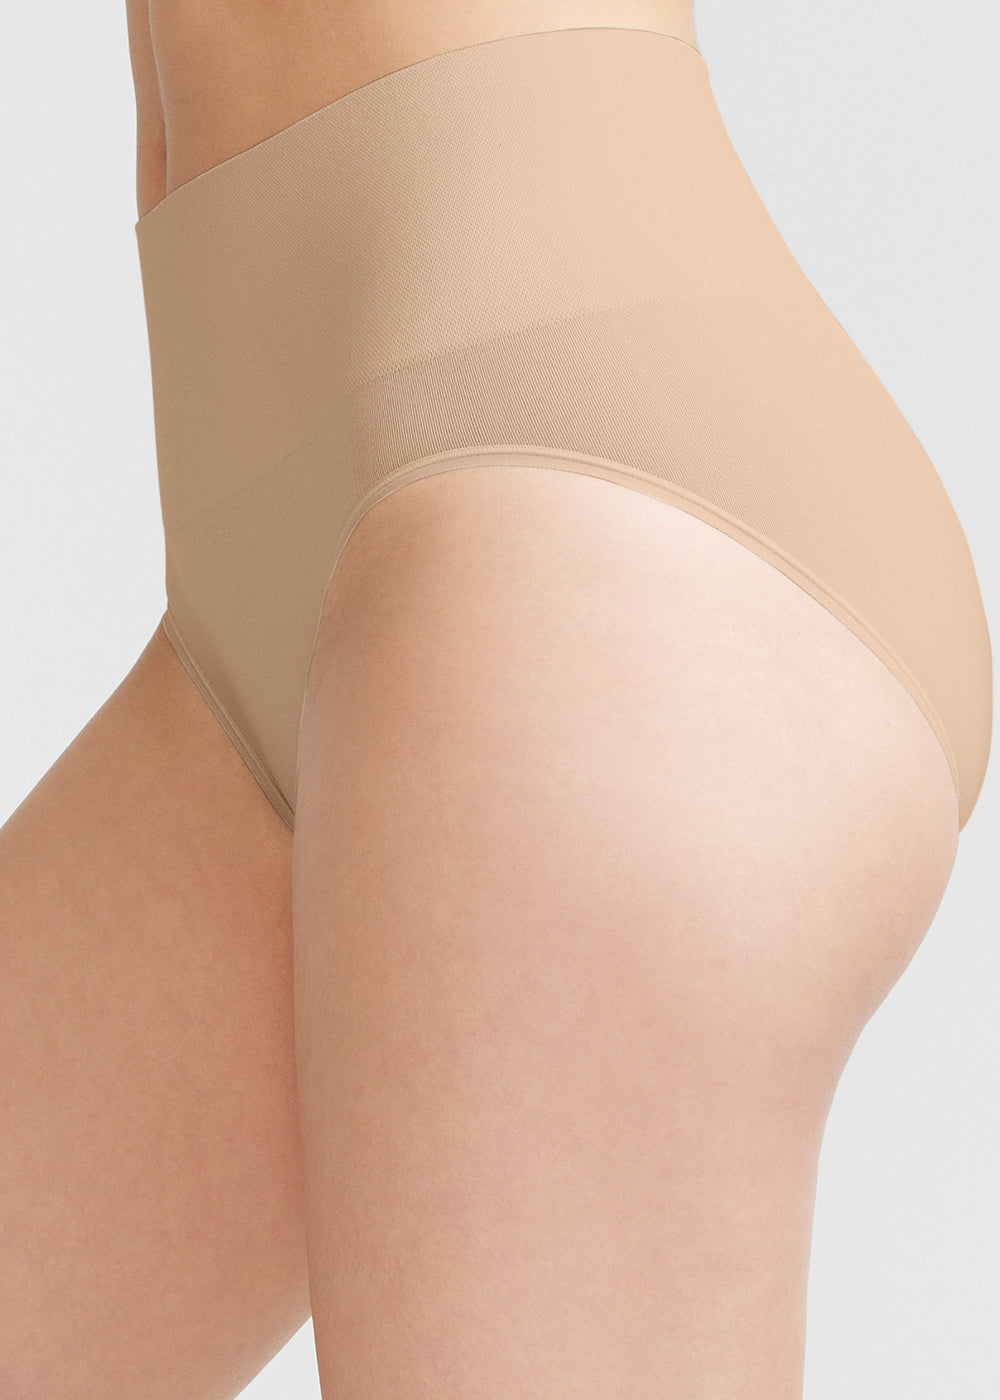 Sage Shaping Brief - Seamless from Yummie in Almond  - 1